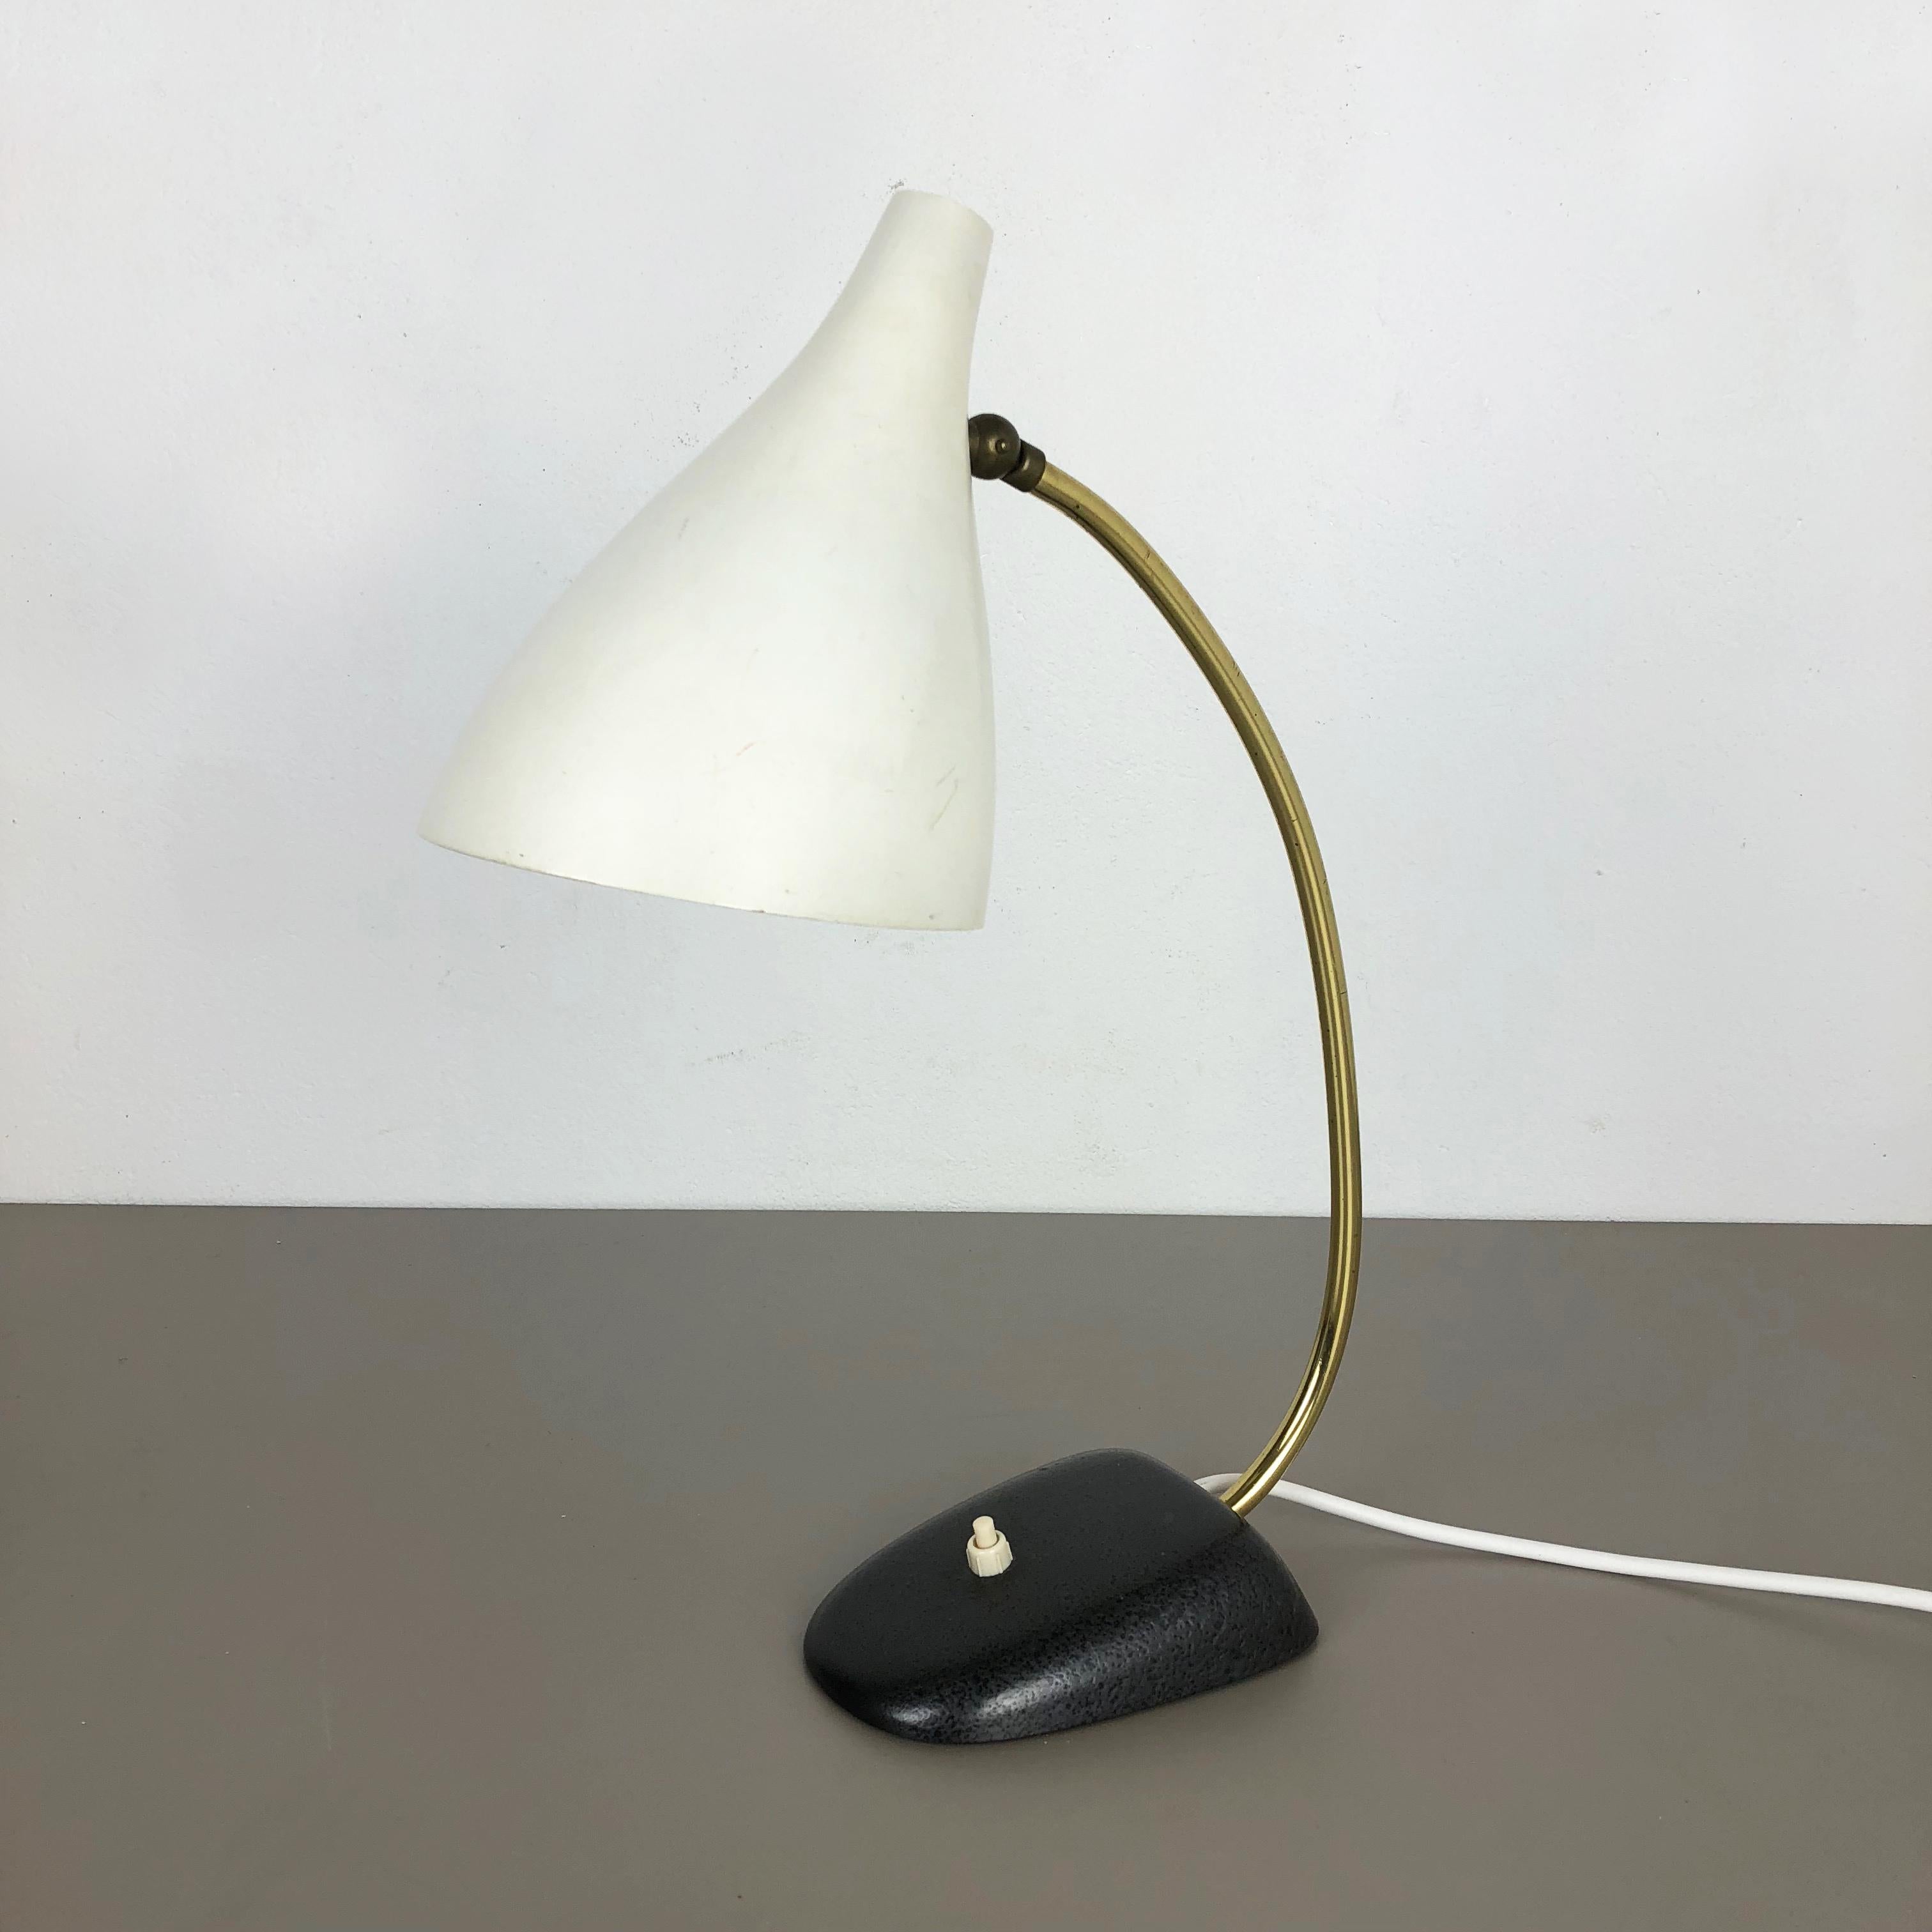 Article:

Table light


Origin:

Germany


Producer:

Cosack lights, Germany


Material:

Metal


Age:

1960s



Description:

This original 1970s table light made by Cosack in Germany. This minimalist table light has a